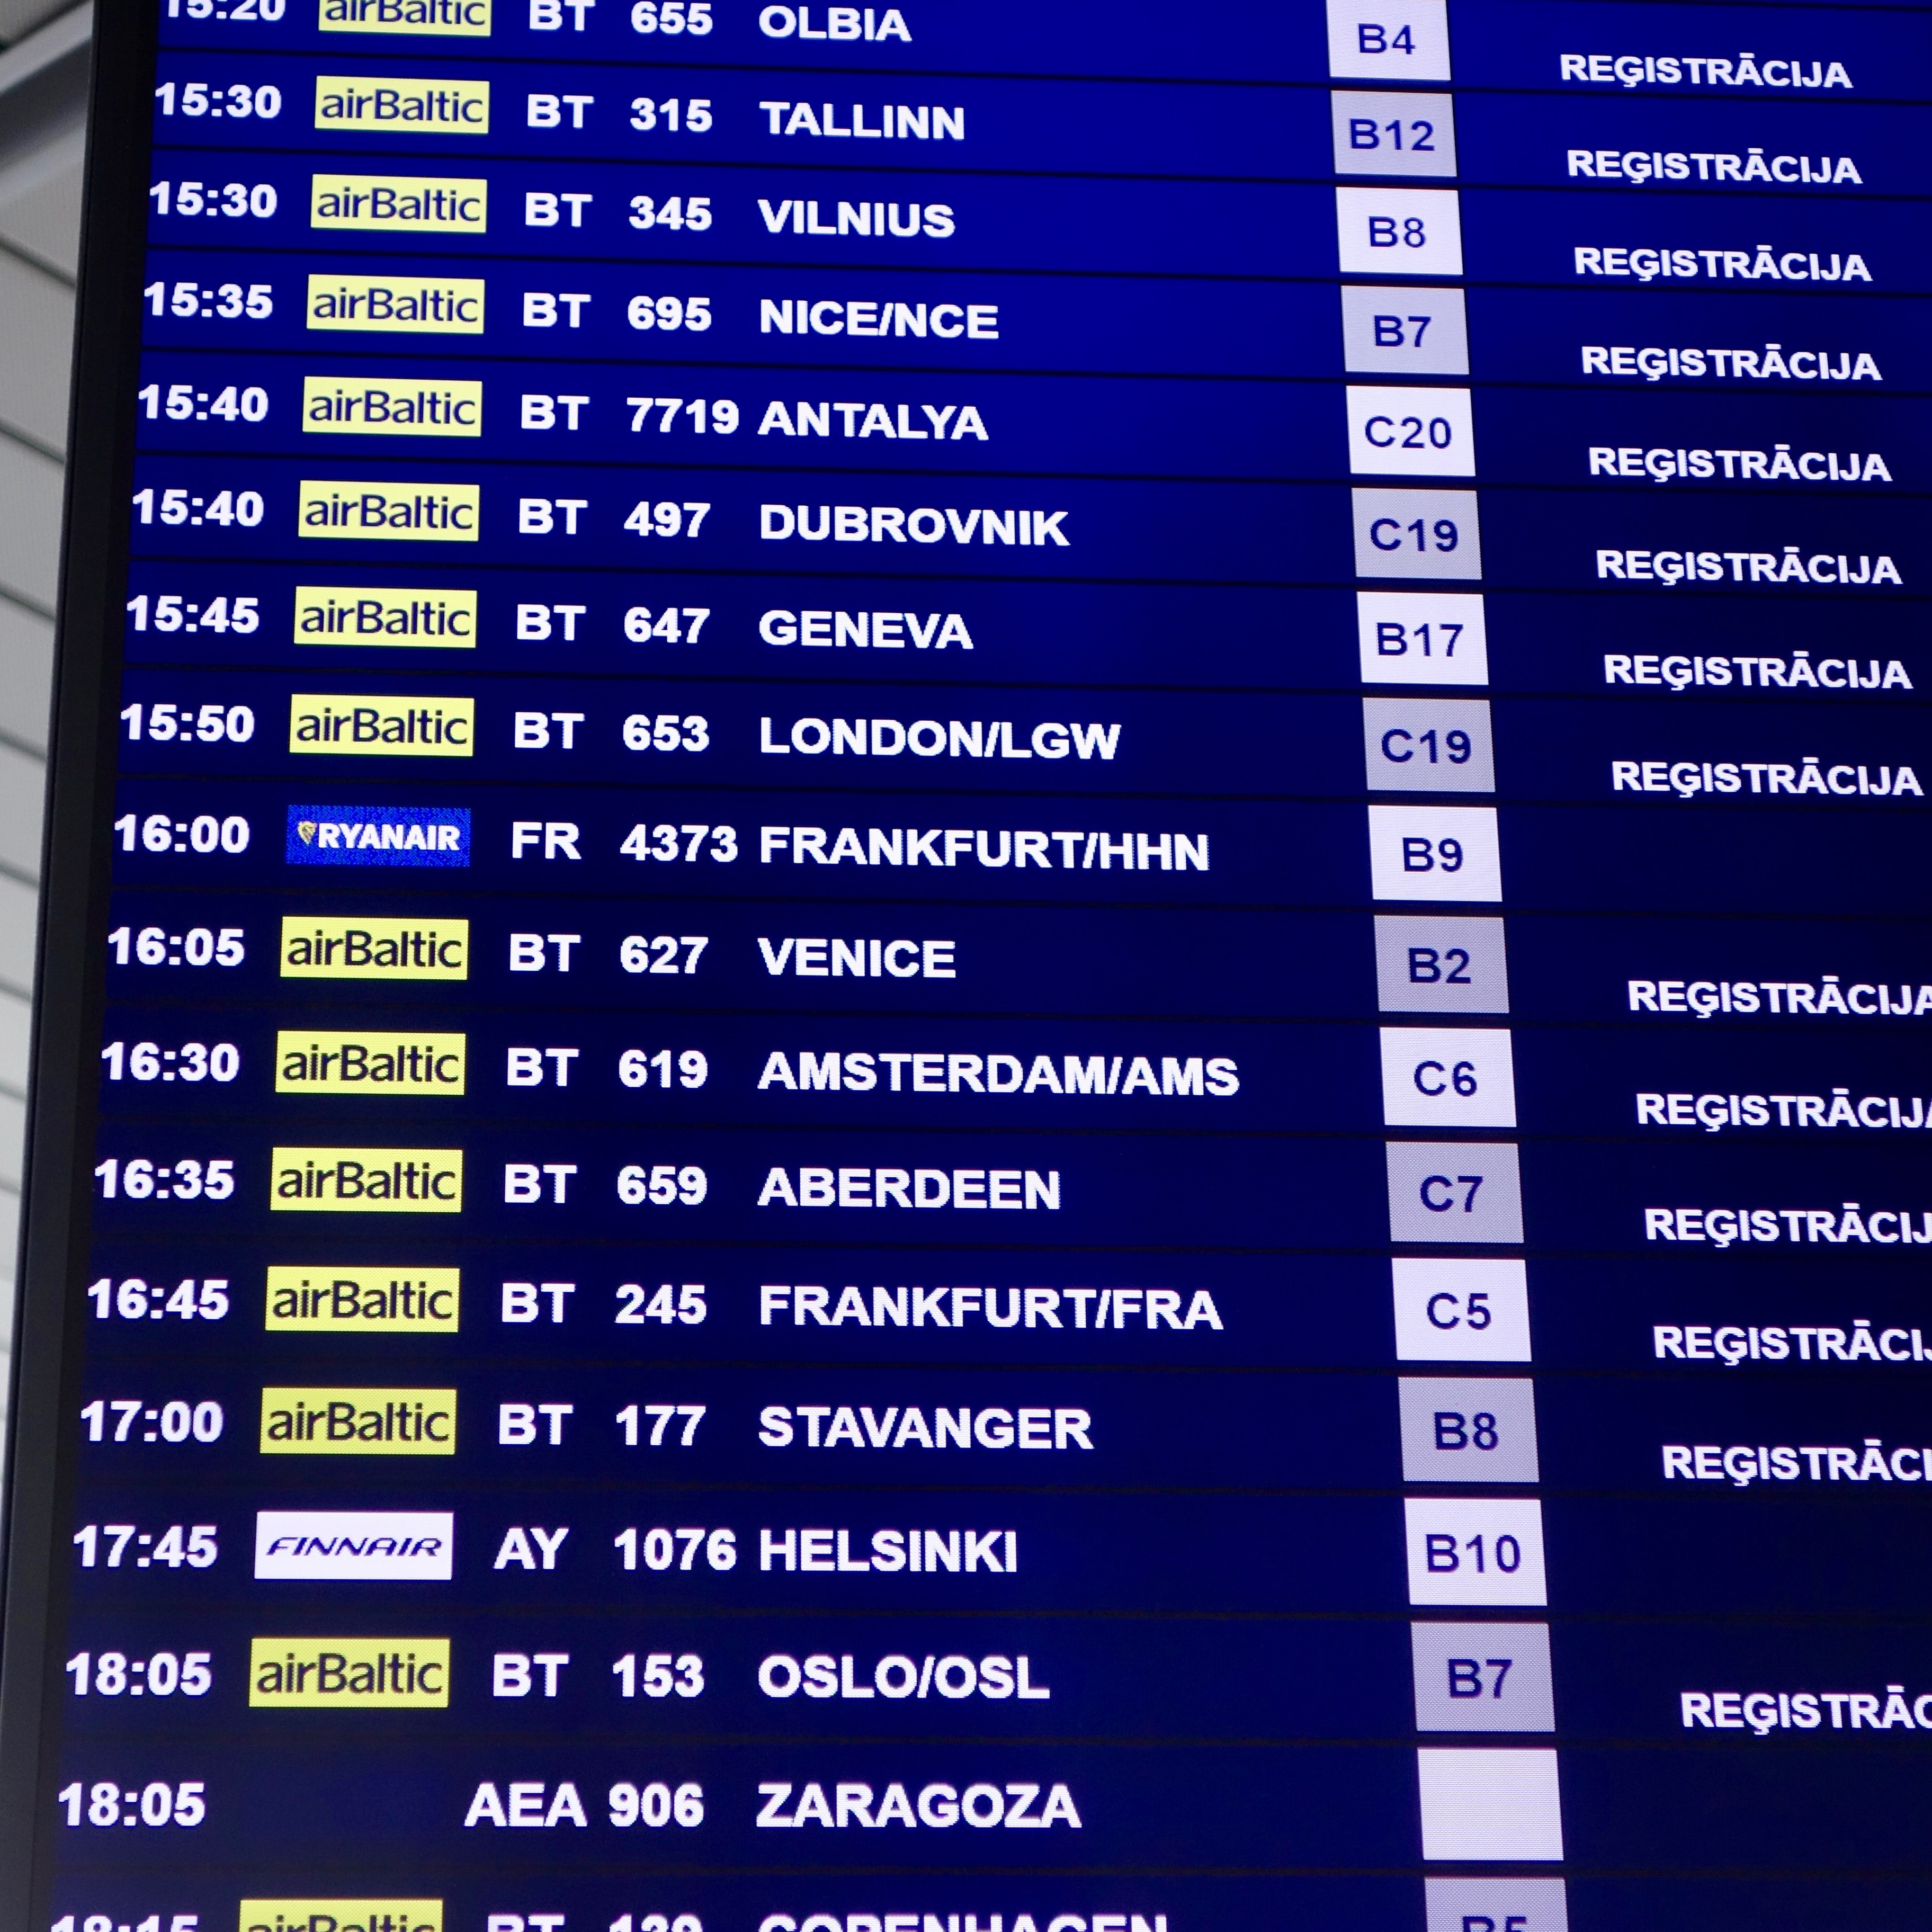 An airport video display of flights highlights the hub at Riga Airport in Latvia.  A wide majority of the flights are operated by airBaltic, which shows up in the signature chartreuse green against a dark blue background with white lettering.  